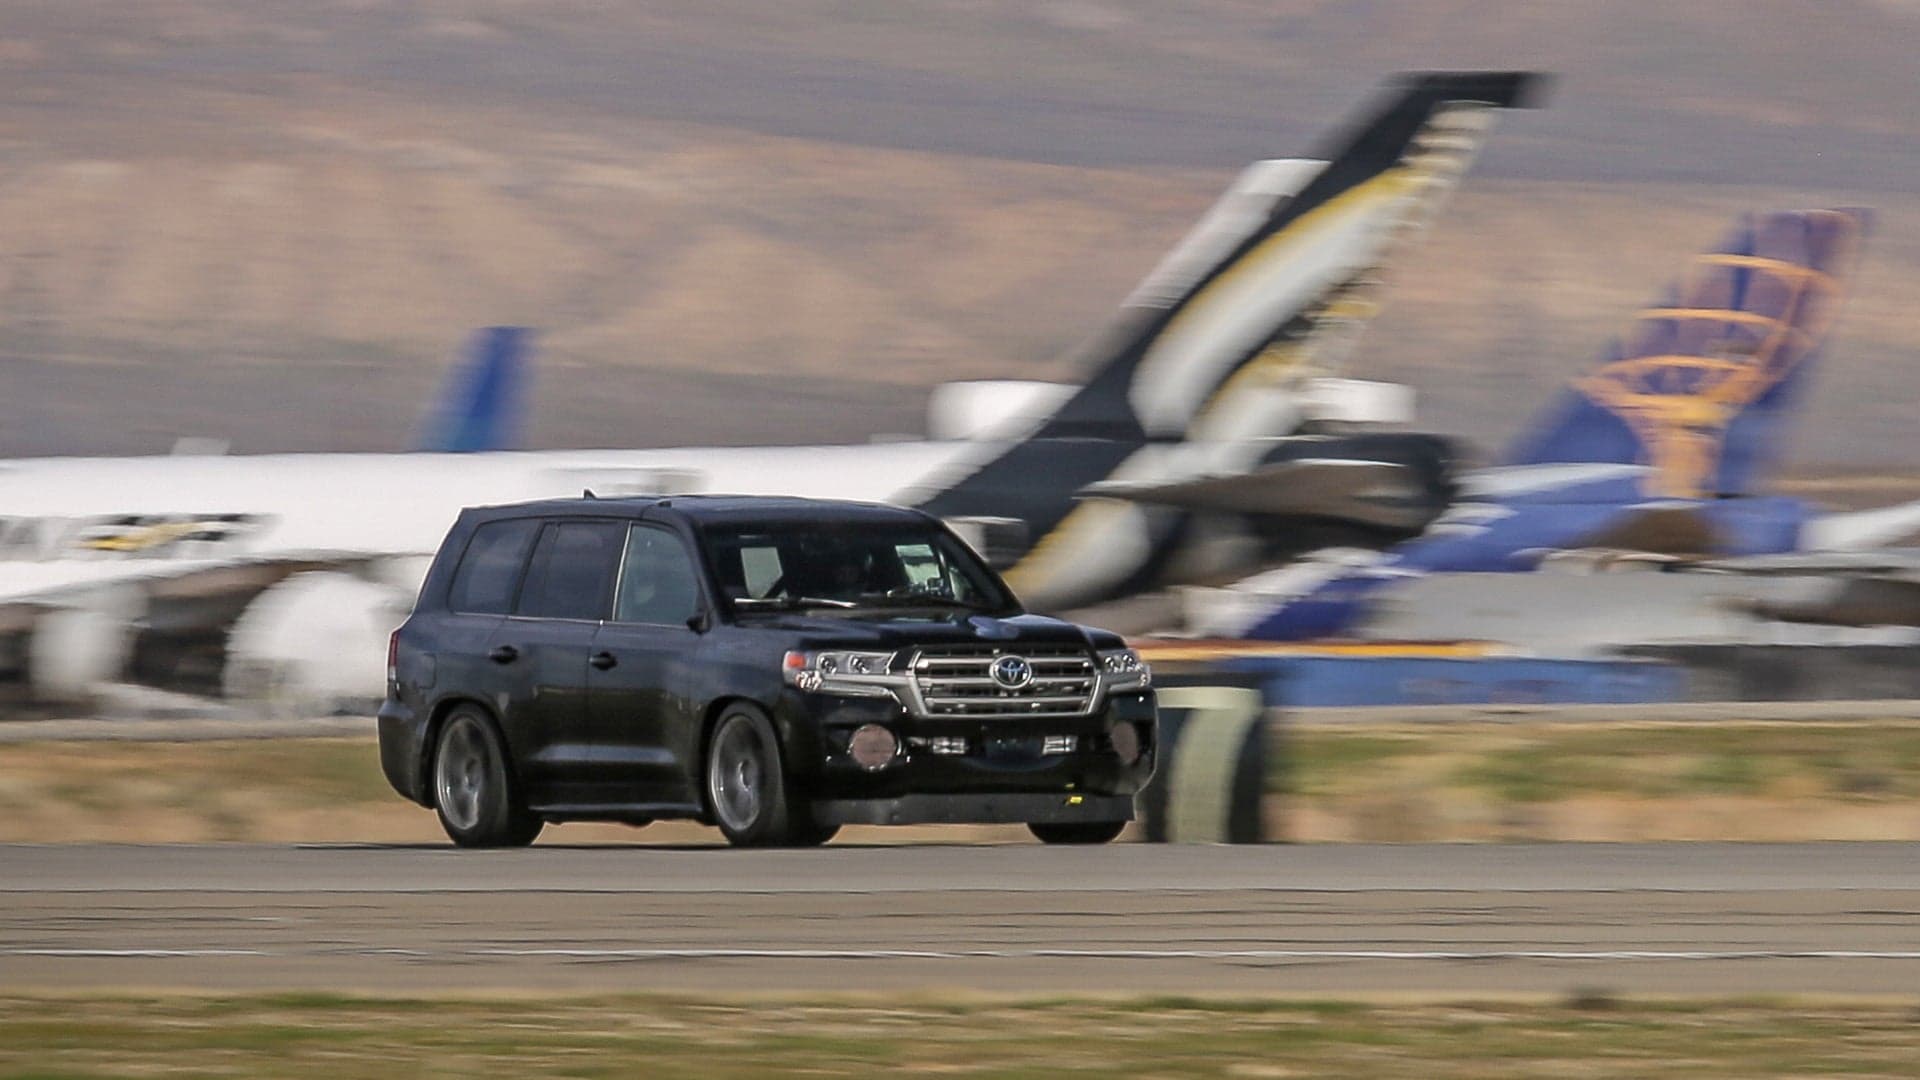 Toyota’s 2,000-HP Land Cruiser Sets New SUV Top Speed Record of 230 MPH